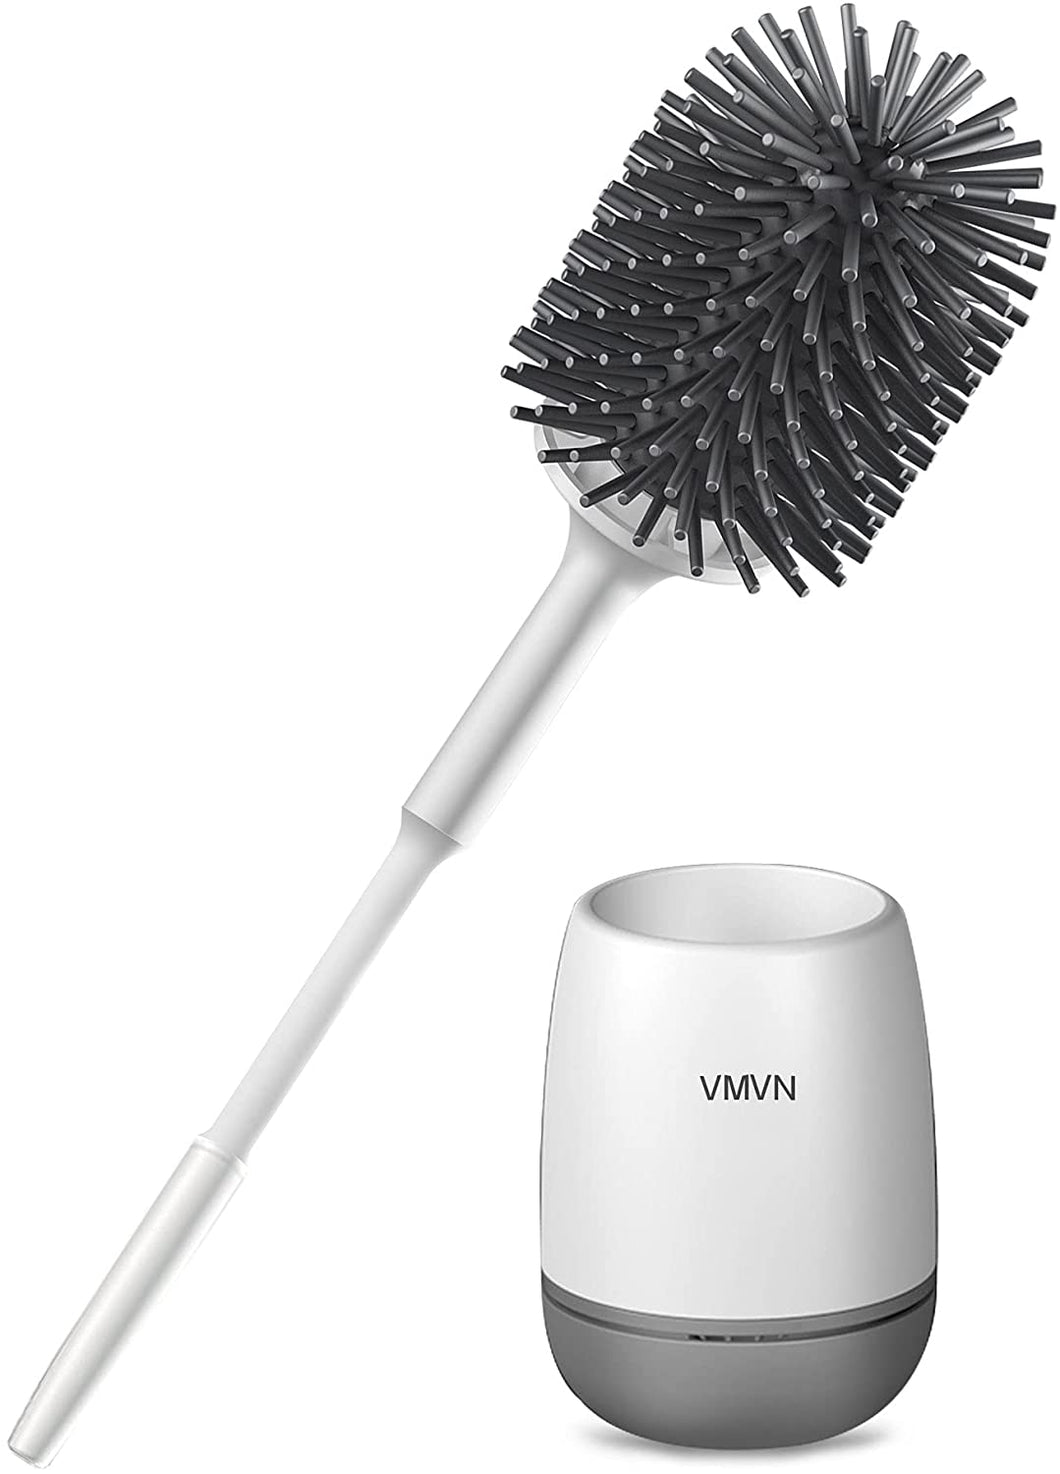 VMVN Toilet Bowl Brush and Holder,Compact Toilet Cleaner Brush Set for Bathroom Deep Cleaning ,Silicone Bristles Toilet Scrubber